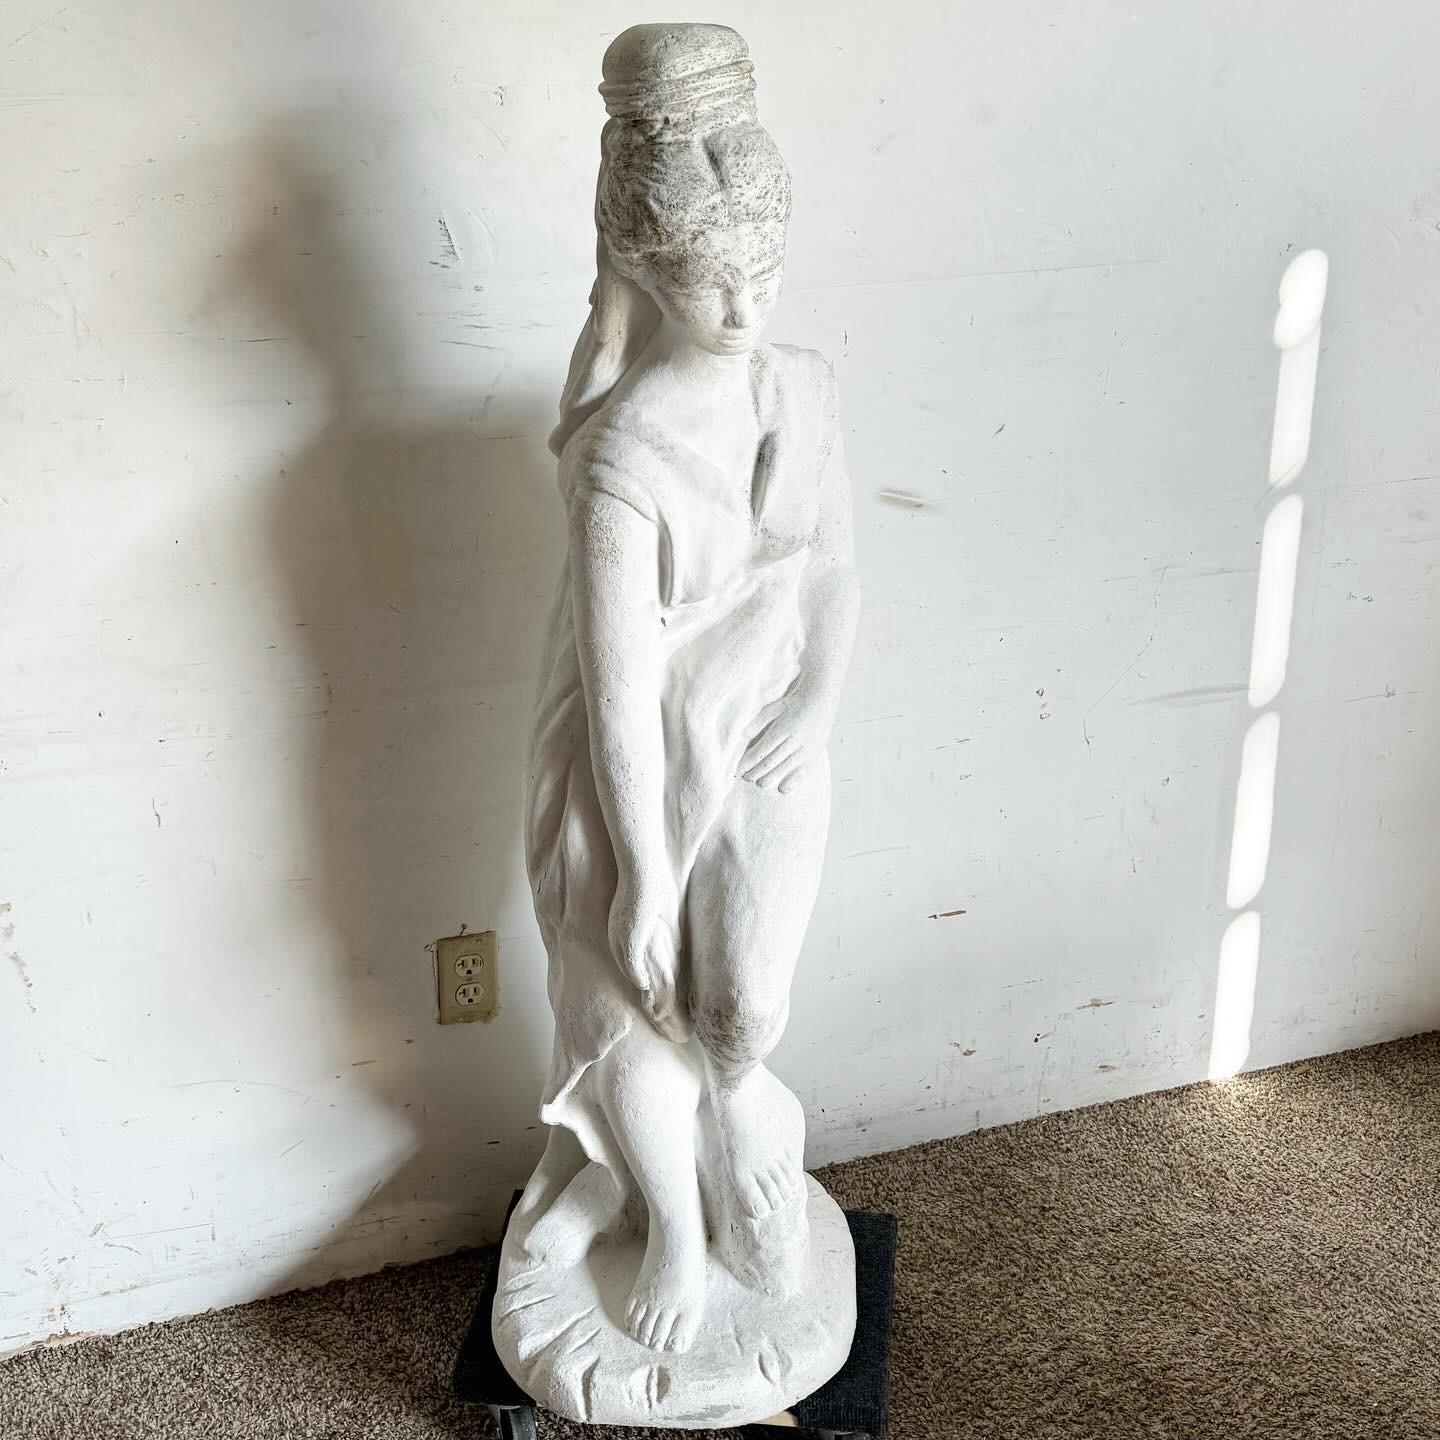 Embrace the timeless elegance of our Cast Cement Garden Statue of a Lady in Robe, a perfect blend of classical beauty and durability, ideal for enhancing any garden or outdoor space.
Vintage pieces may have age-related wear. Review photos carefully,